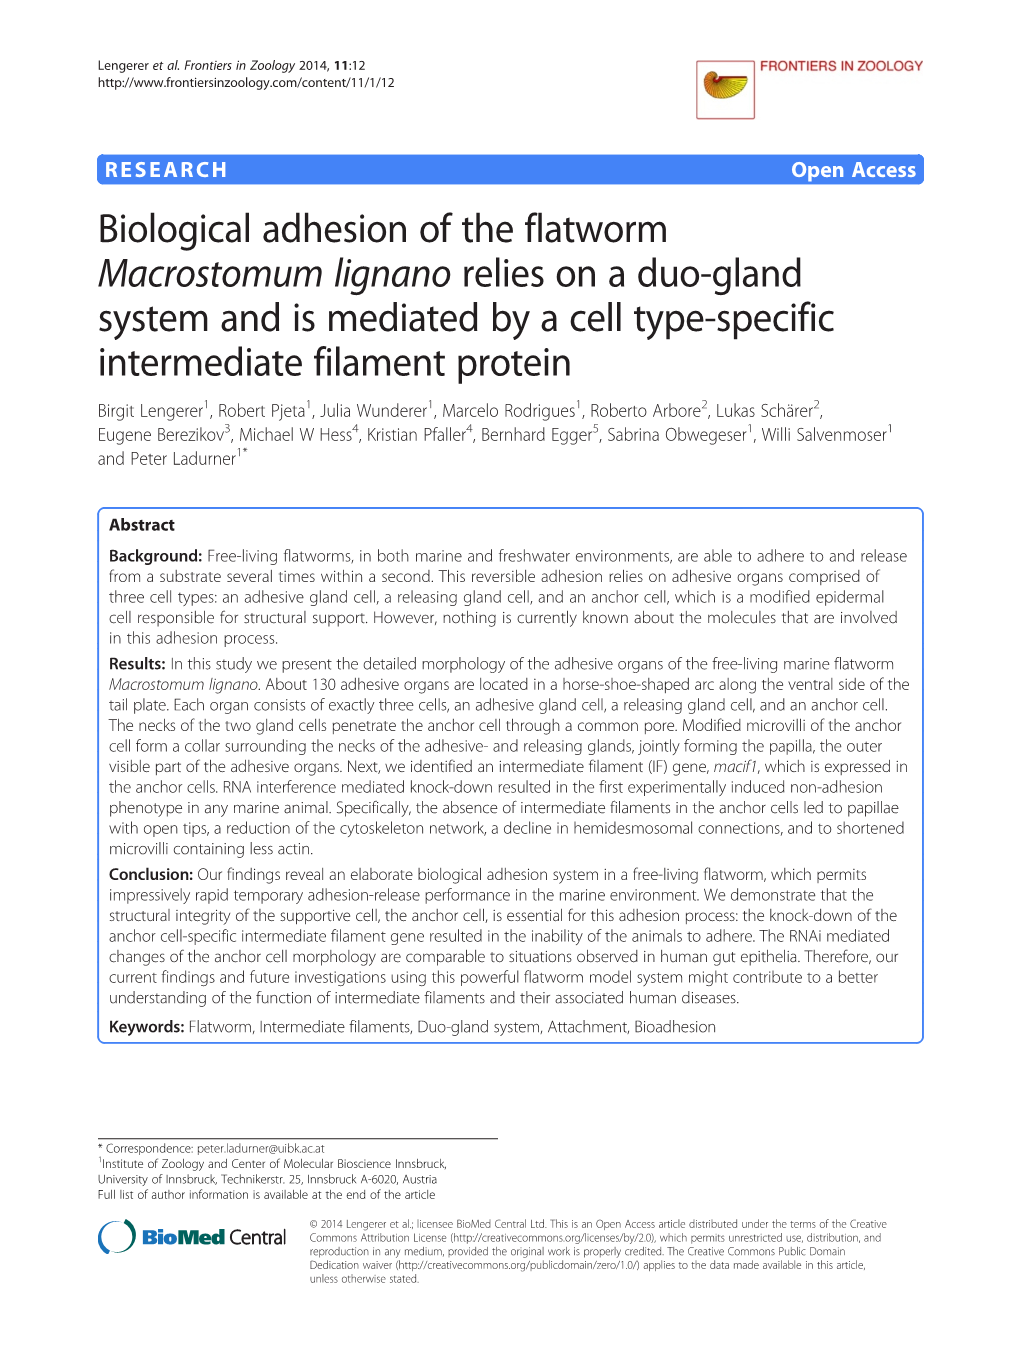 Biological Adhesion of the Flatworm Macrostomum Lignano Relies on A